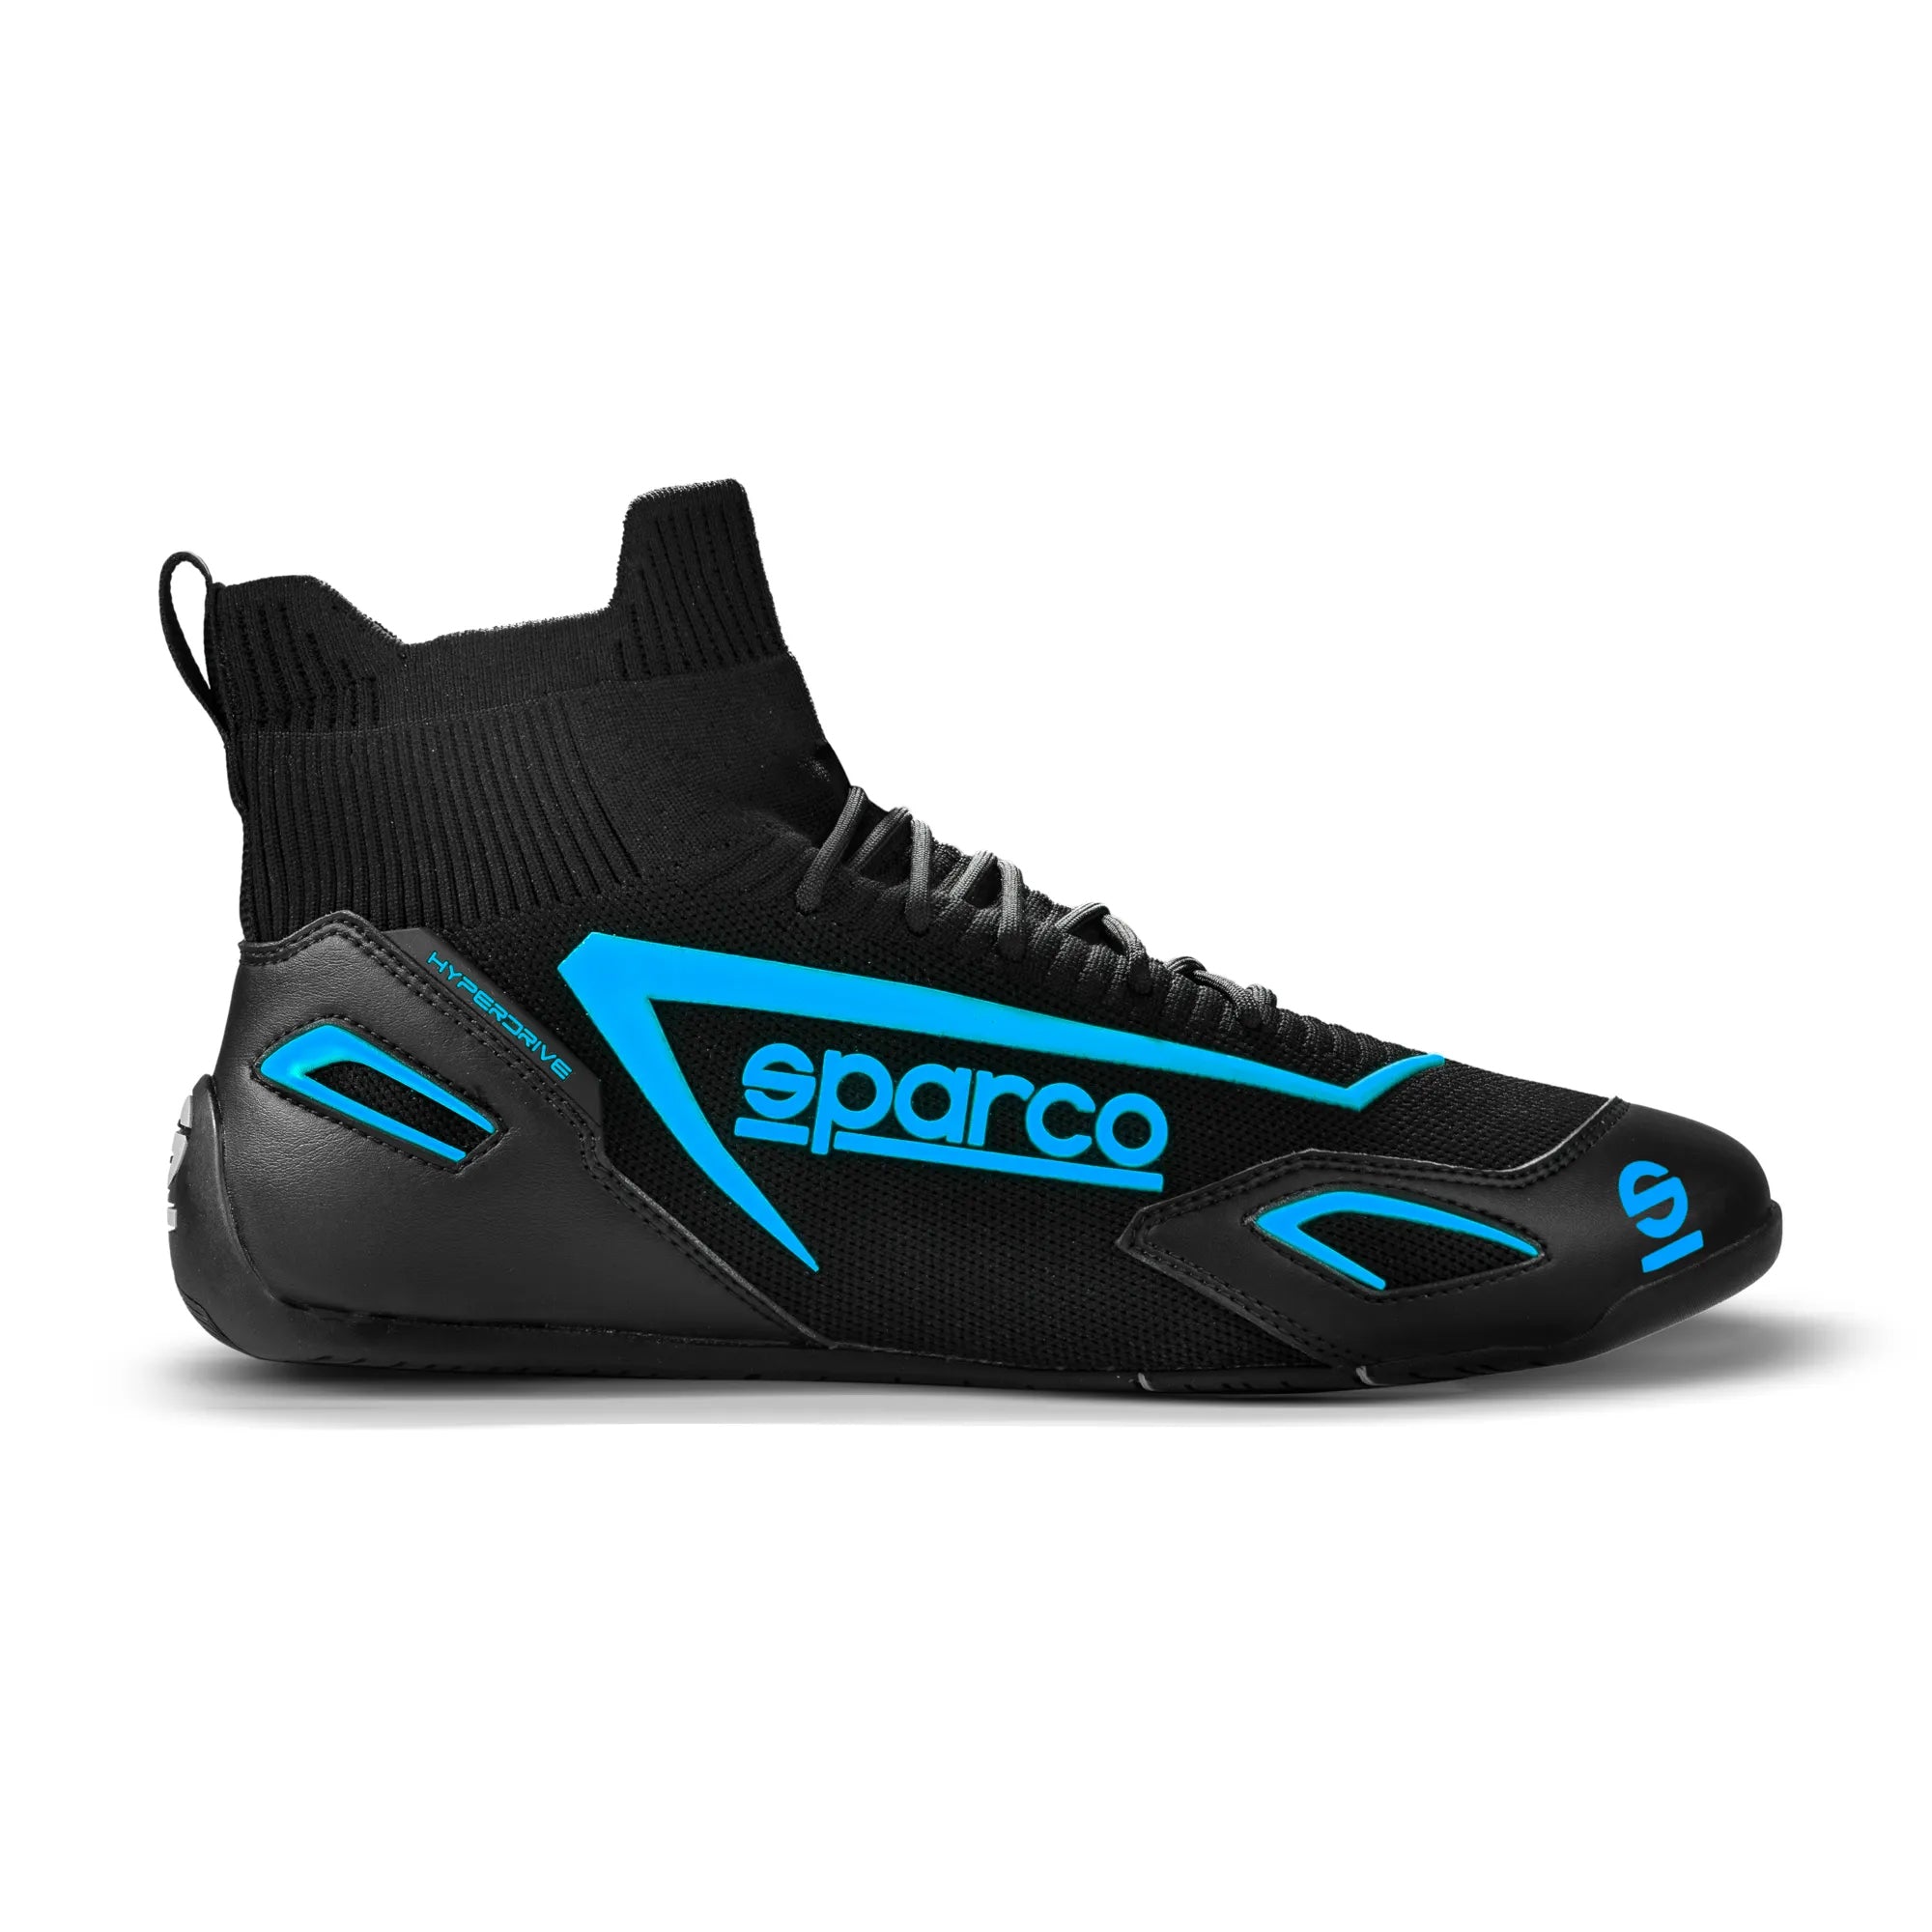 SPARCO 00129343NRAZ Gaming sim racing shoes HYPERDRIVE, black/blue, size 43 Photo-0 